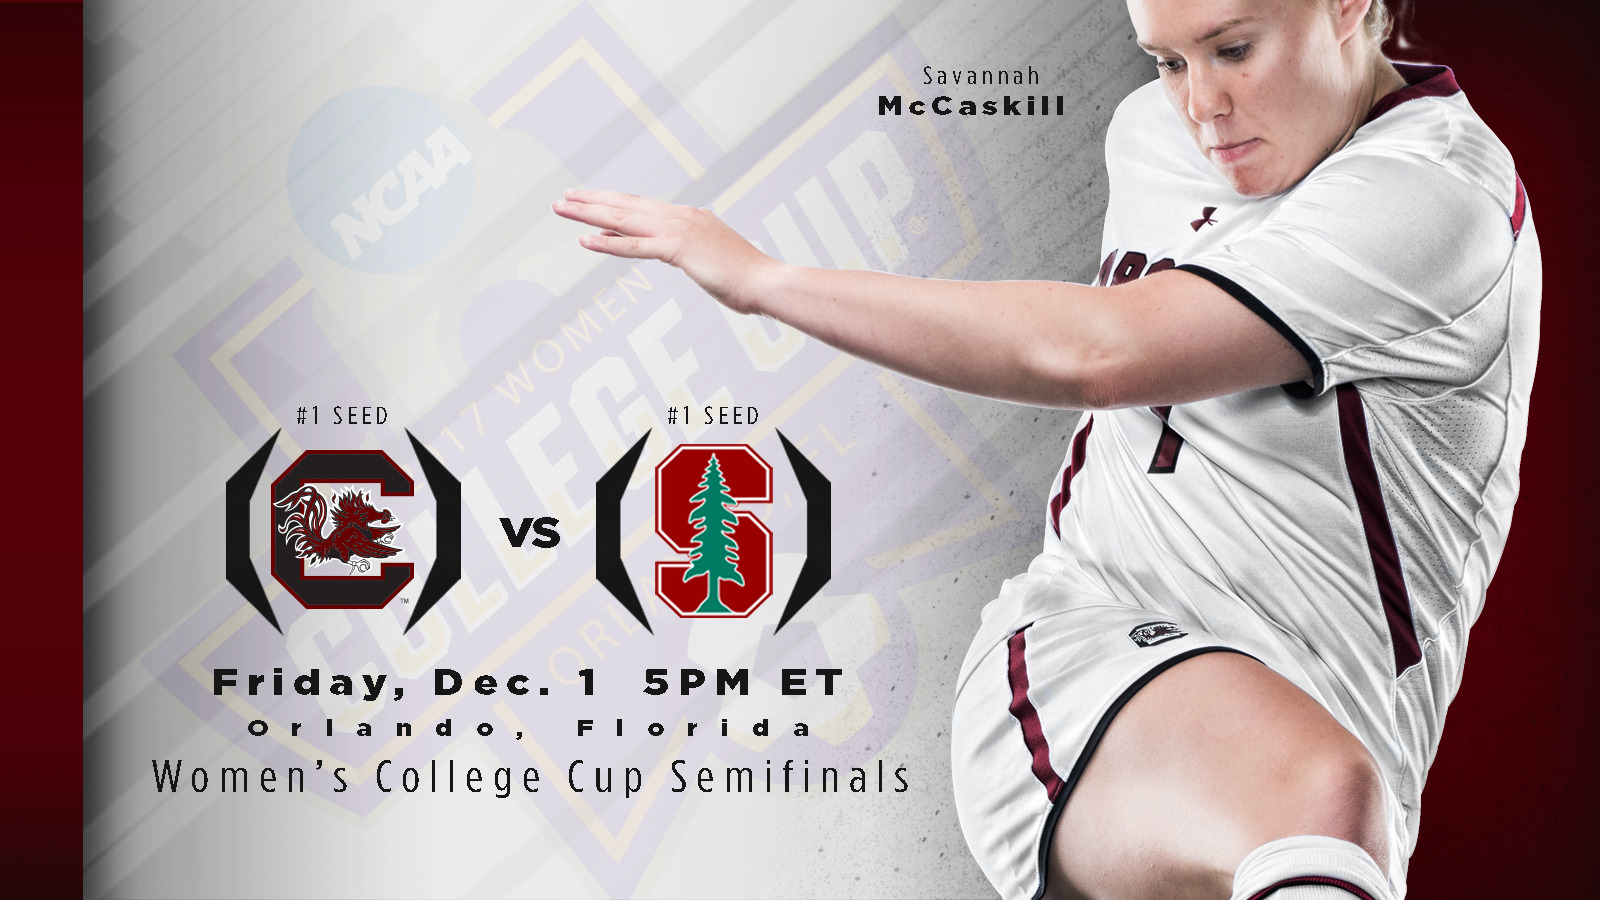 Gamecocks Battle Stanford In Women's College Cup Semifinals Friday